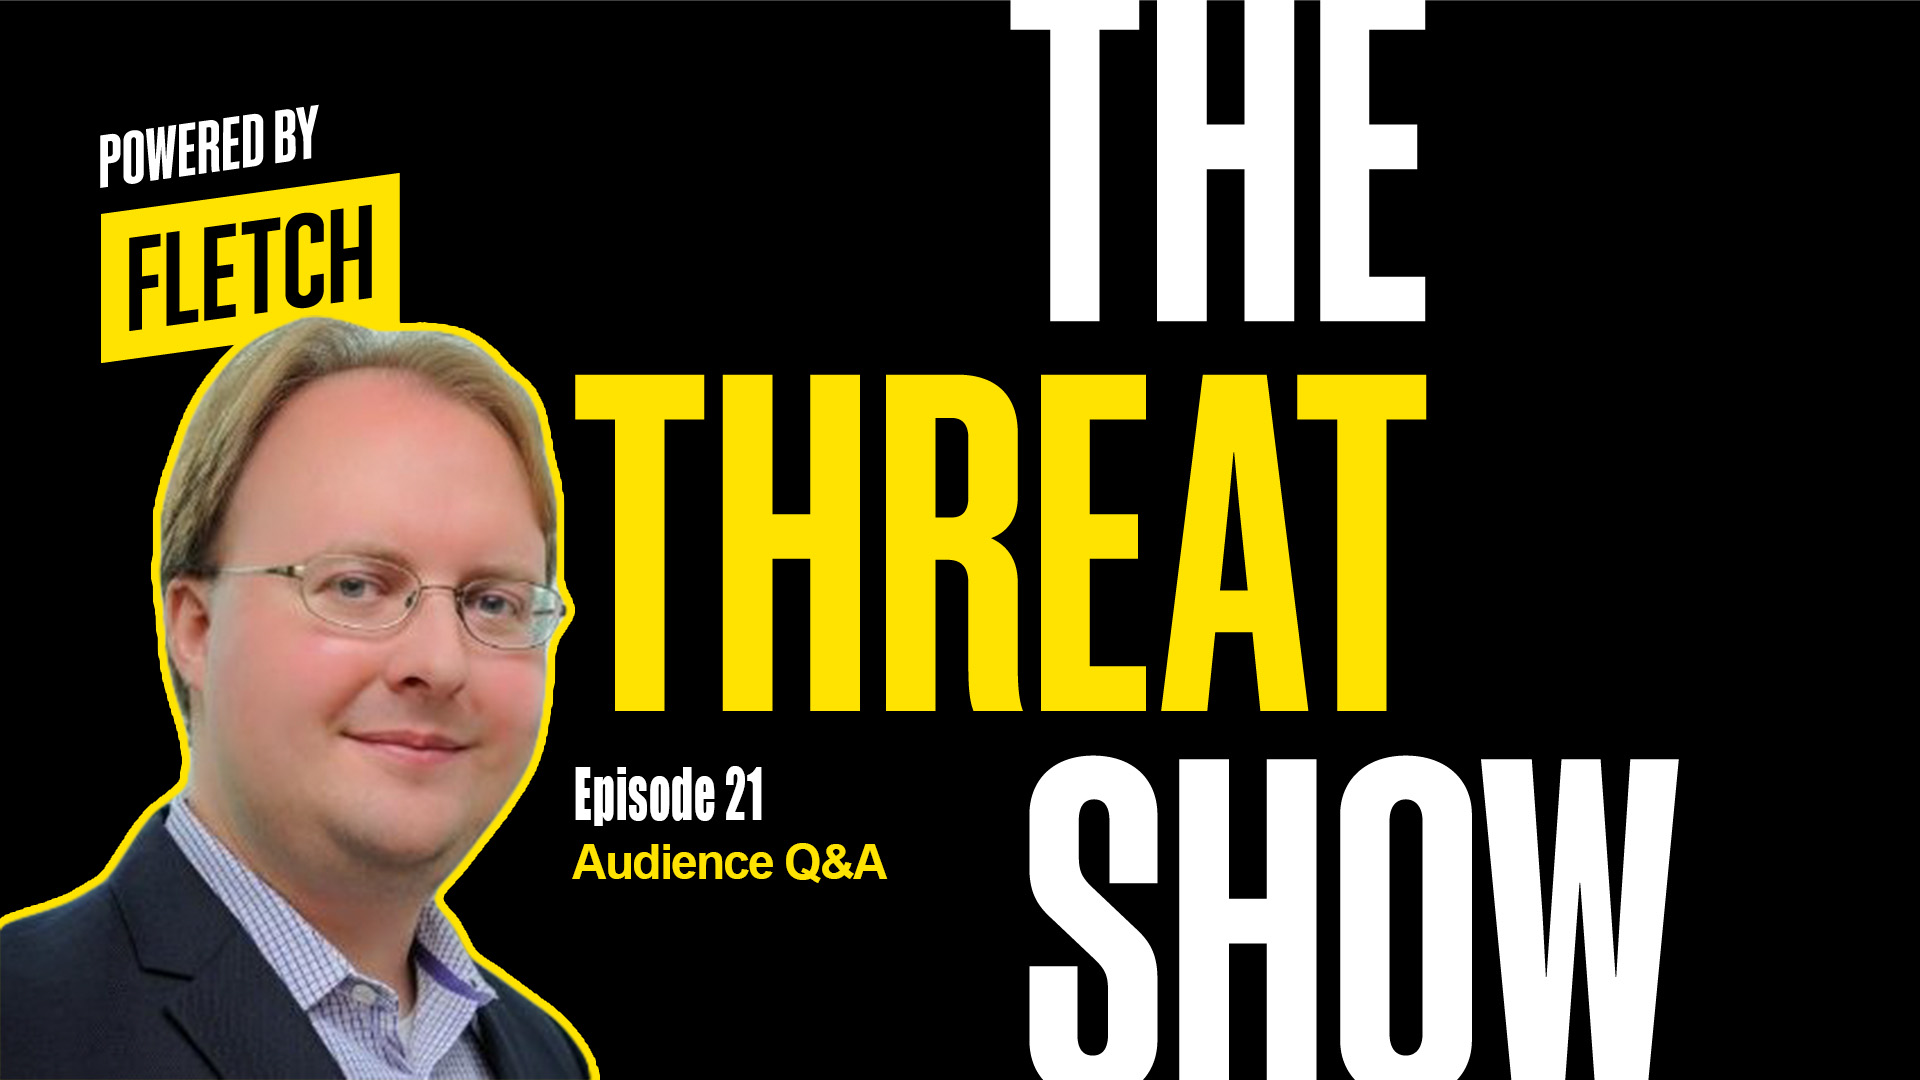 The Threat Show Ep. 21